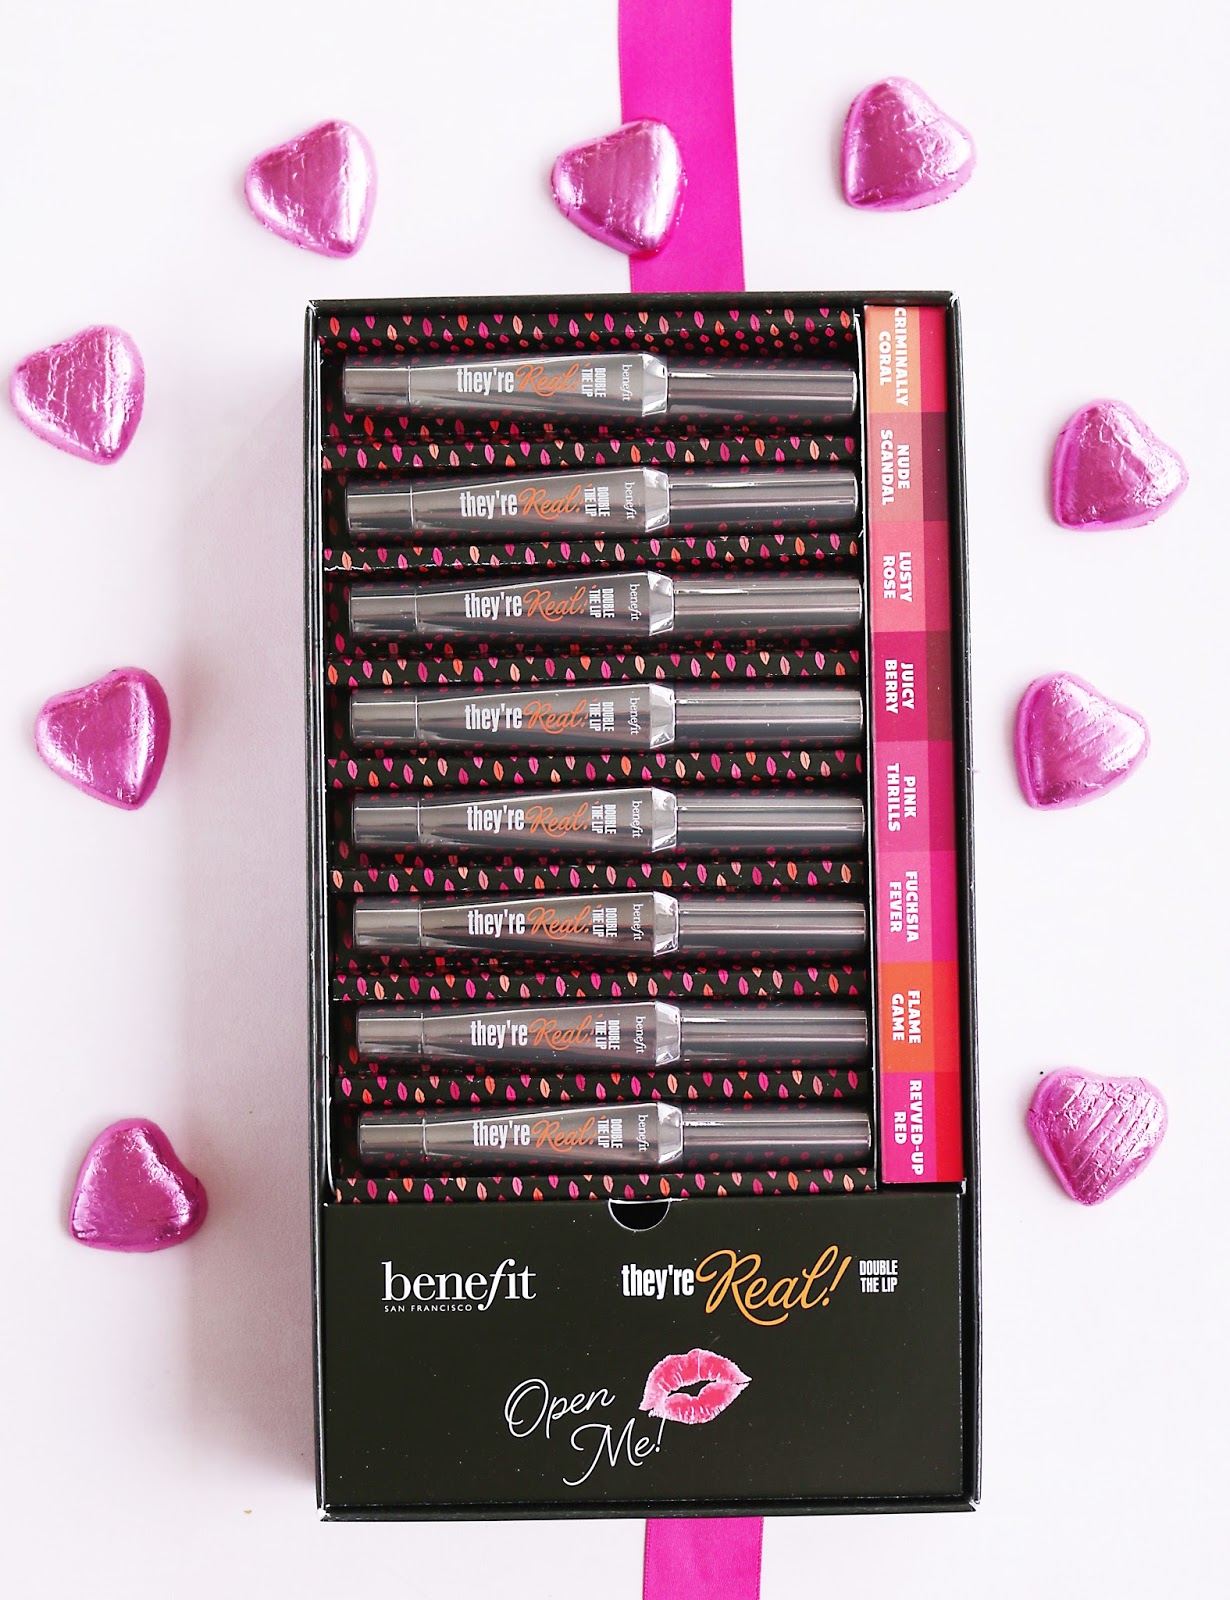 Beauty, Lipstick, Valentine's day, Make Up, Benefit Cosmetics, Benefit Cosmetics They're Real Double The Lip Lipstick, They're Real Double The Lip Lipstick Review, Benefit They're Real Double The Lip Lipstick swatches, Benefit swatches, 